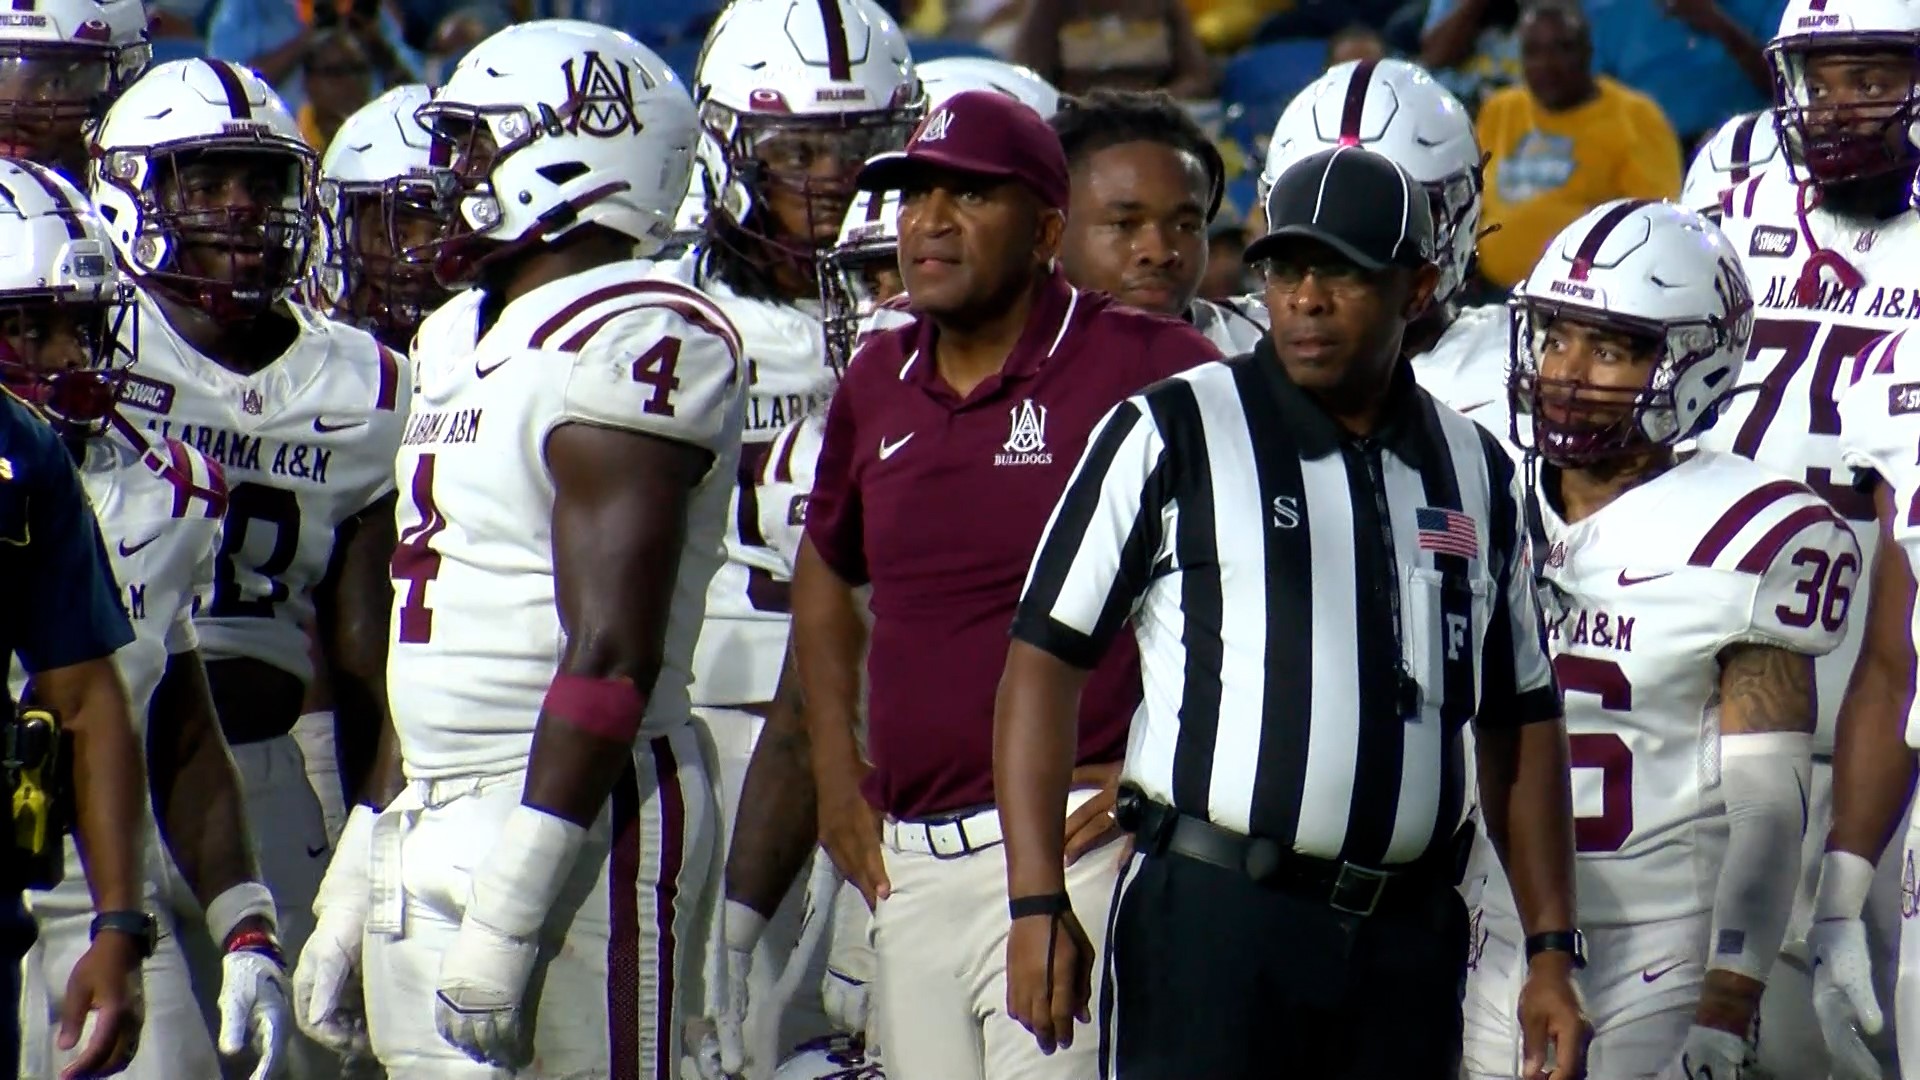 The Alabama A&M Bulldogs began SWAC play with a 20-10 loss to Southern in Baton Rouge.